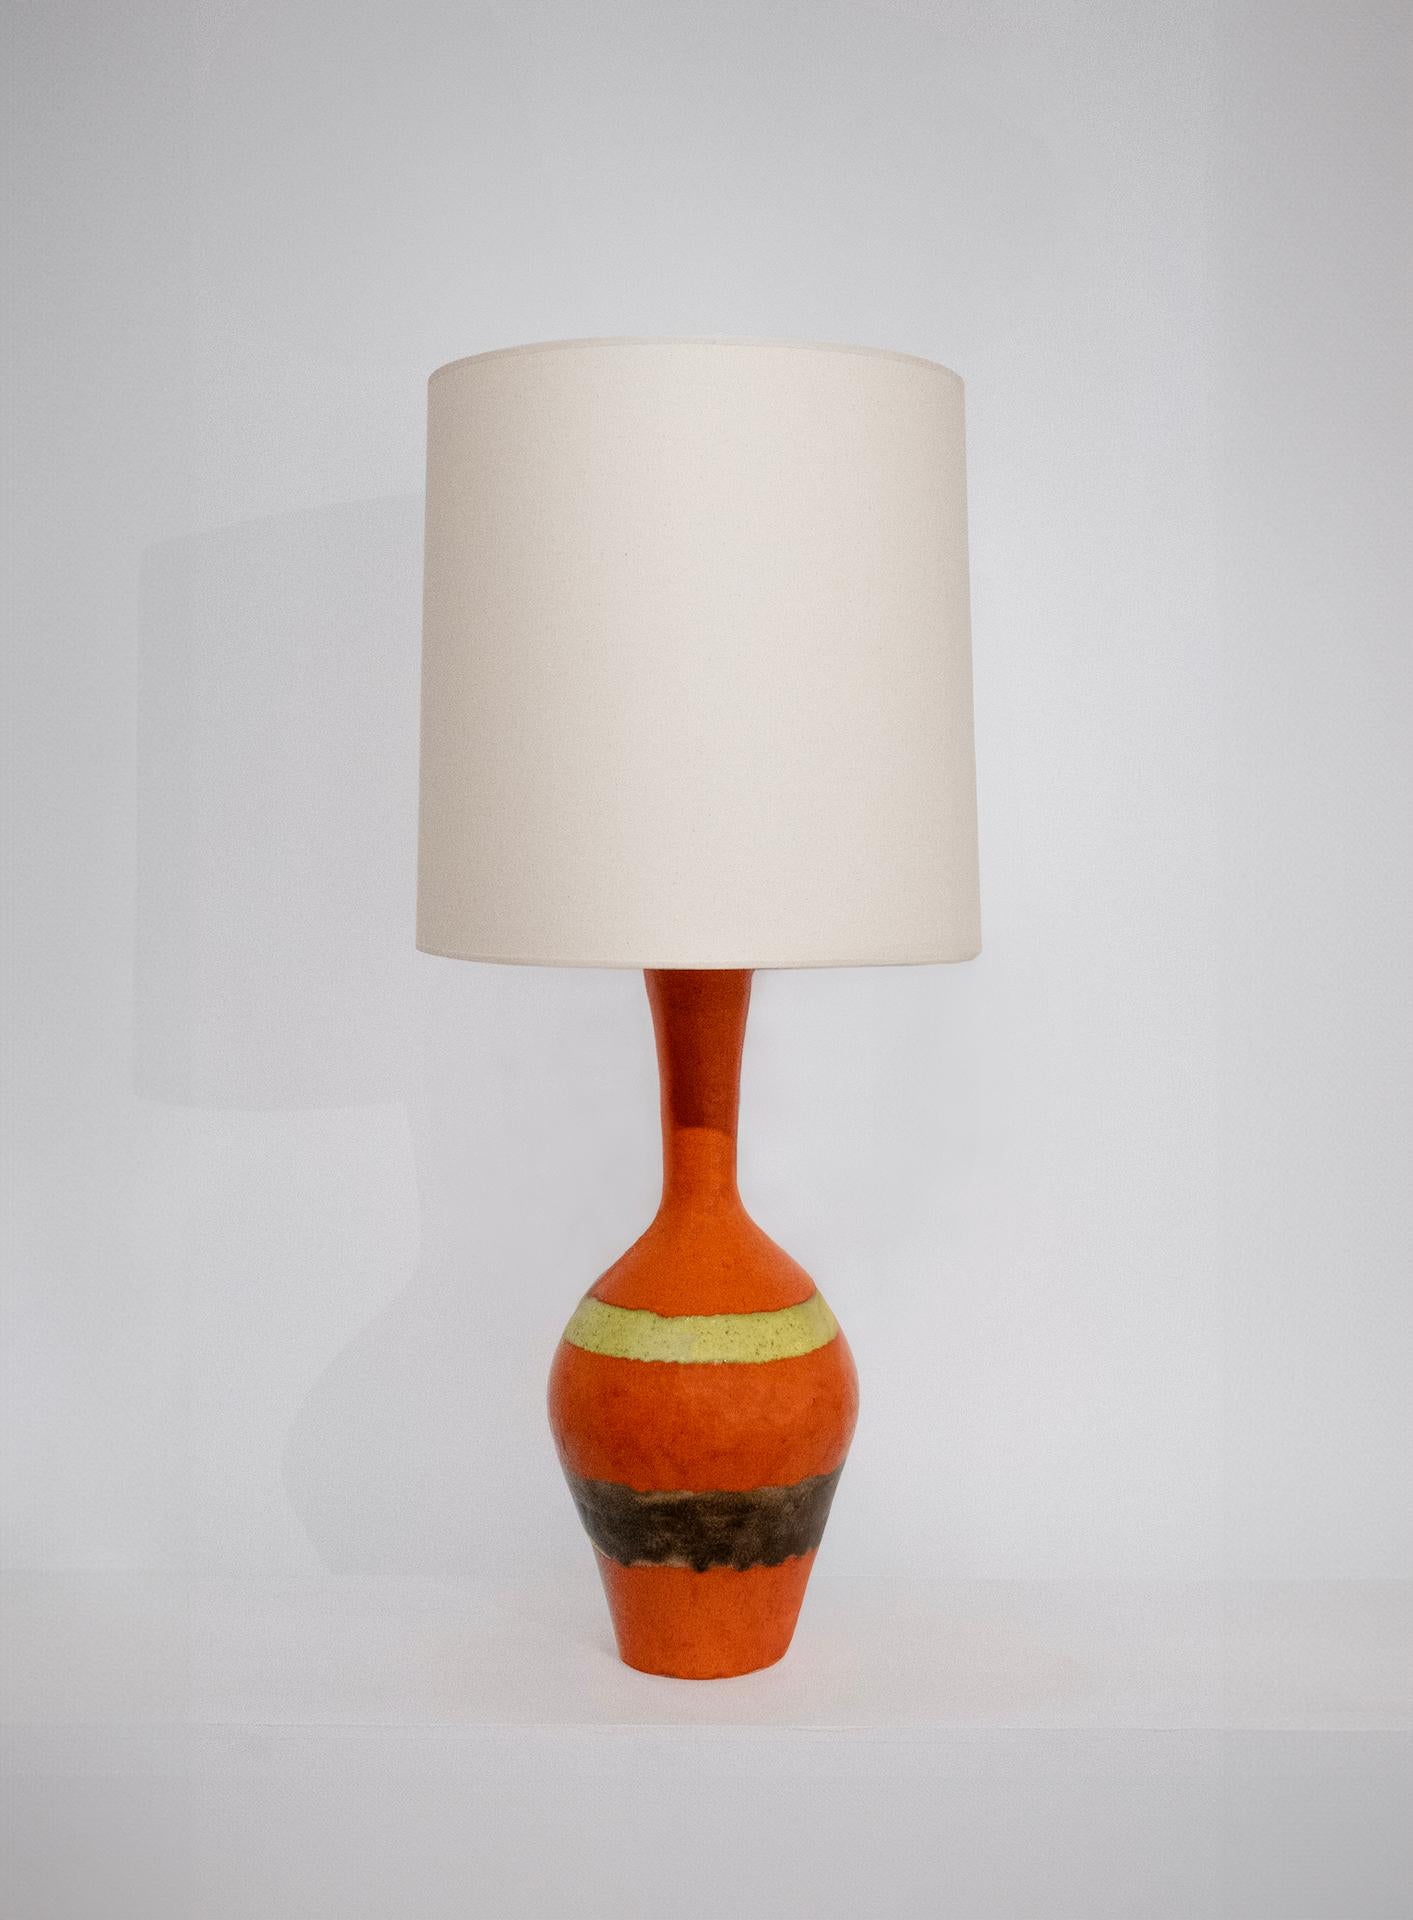 Guido GAMBONE (1909-1969)

Italy, circa 1960
Signed

​Superb large ceramic lamp, very bright shiny orange enamel 
with superb texture.
An extremely decorative lamp by a great 20th century italian ceramist.
Magnificent collector's item.

Height